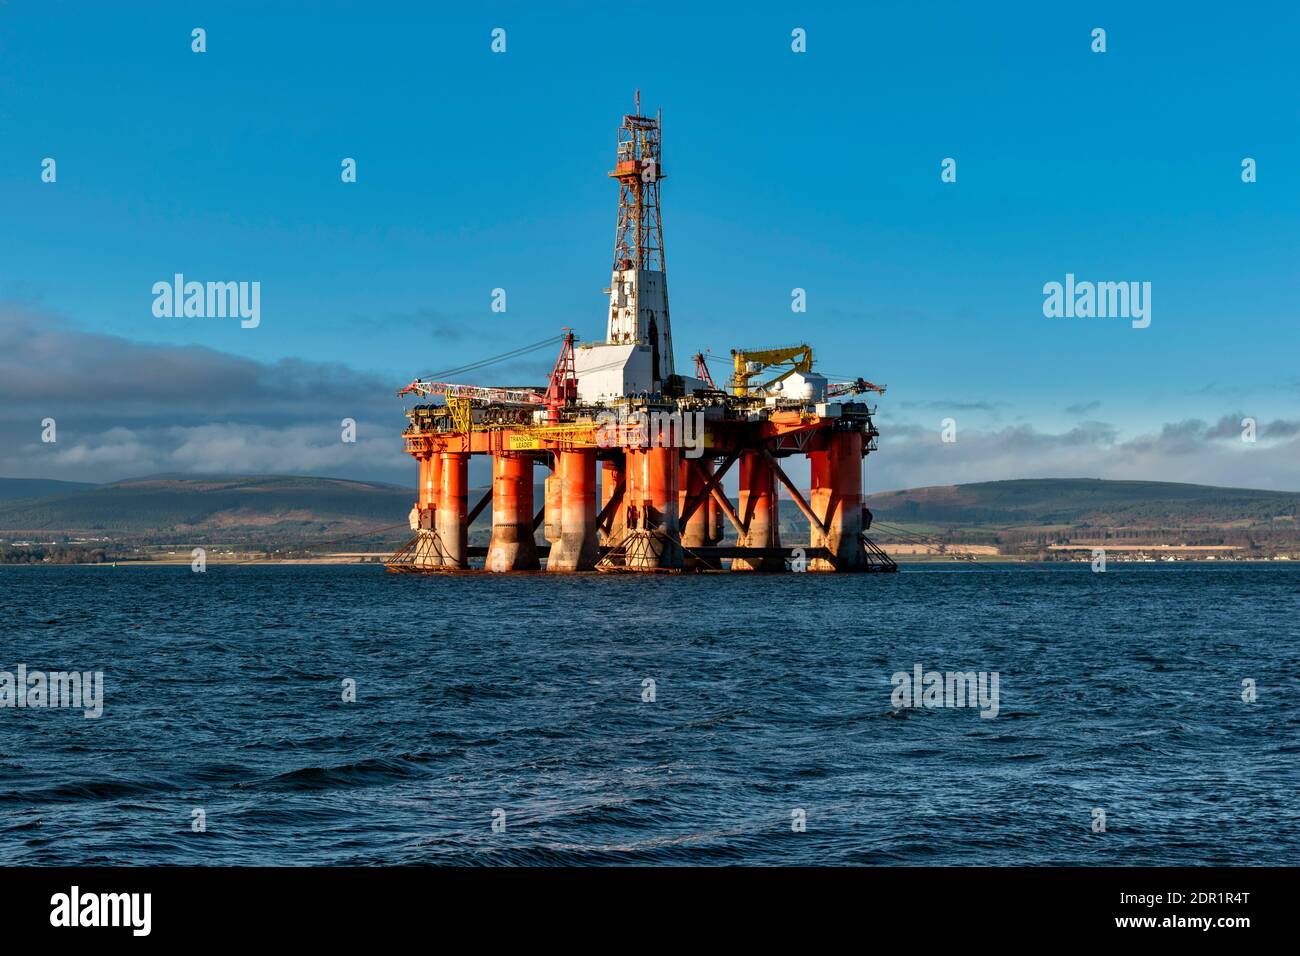 CROMARTY BLACK ISLE PENINSULAR SCOTLAND OIL RIG OR PLATFORM THE TRANSOCEAN LEADER MOORED IN THE CROMARTY FIRTH Stock Photo